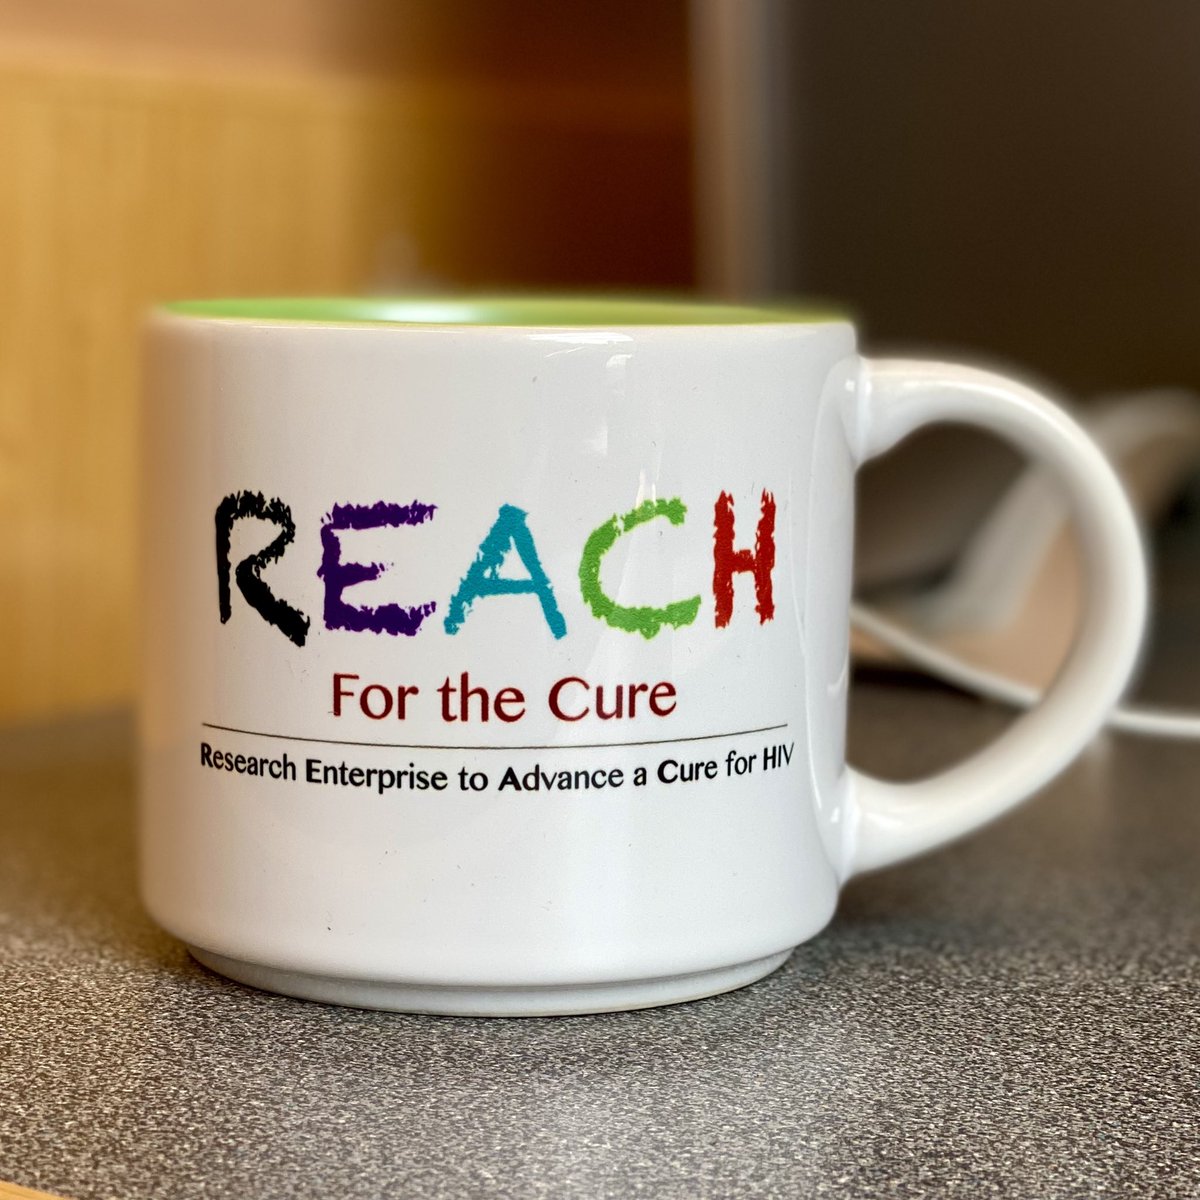 #ResearchersRock at
#MartinDelaneyCollaboratories @REACHforthecure
Because WE ALL NEED an #hivCure for ALL!
@HIVpxresearch @TAGHIVscience 
Thank U 👉🏿@londonpatient 
@MARTHOLANAH @AdamWard333 @AwesomeJonesLab @JesseRidley10 
@6dm4